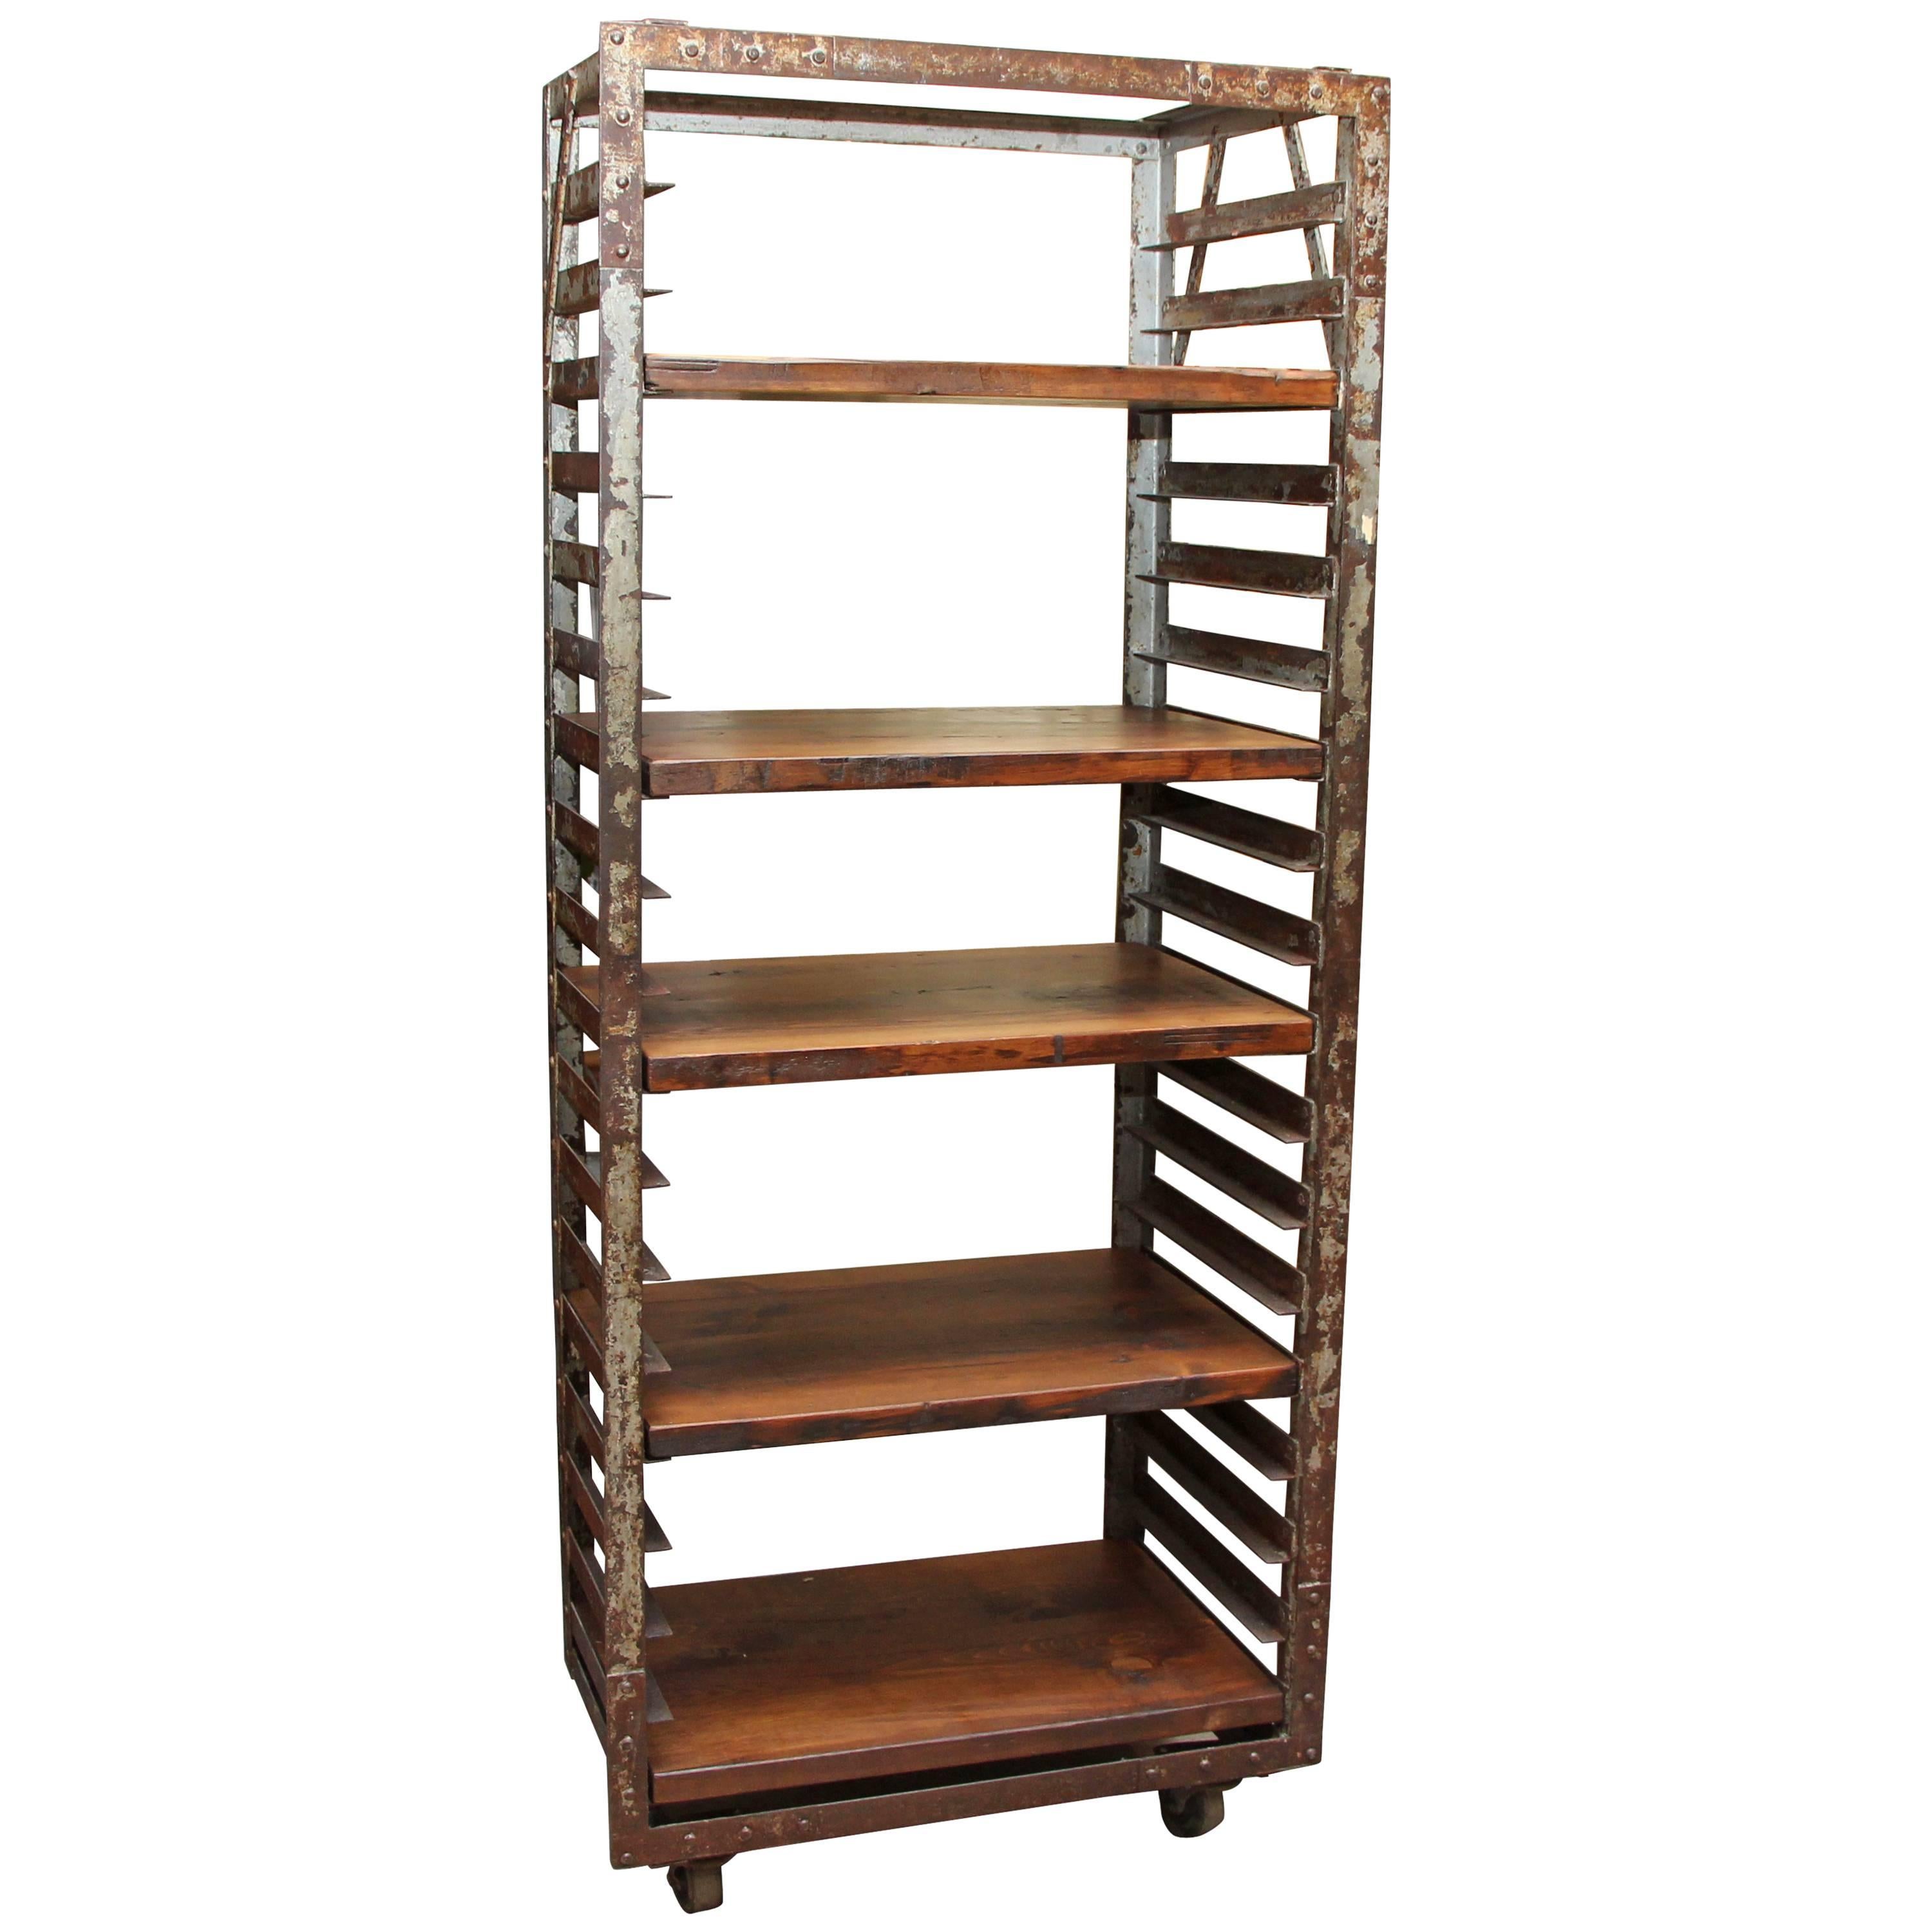 1940s Industrial Age Laquered Steel Baker's "Speed Rack" with Wood Shelves